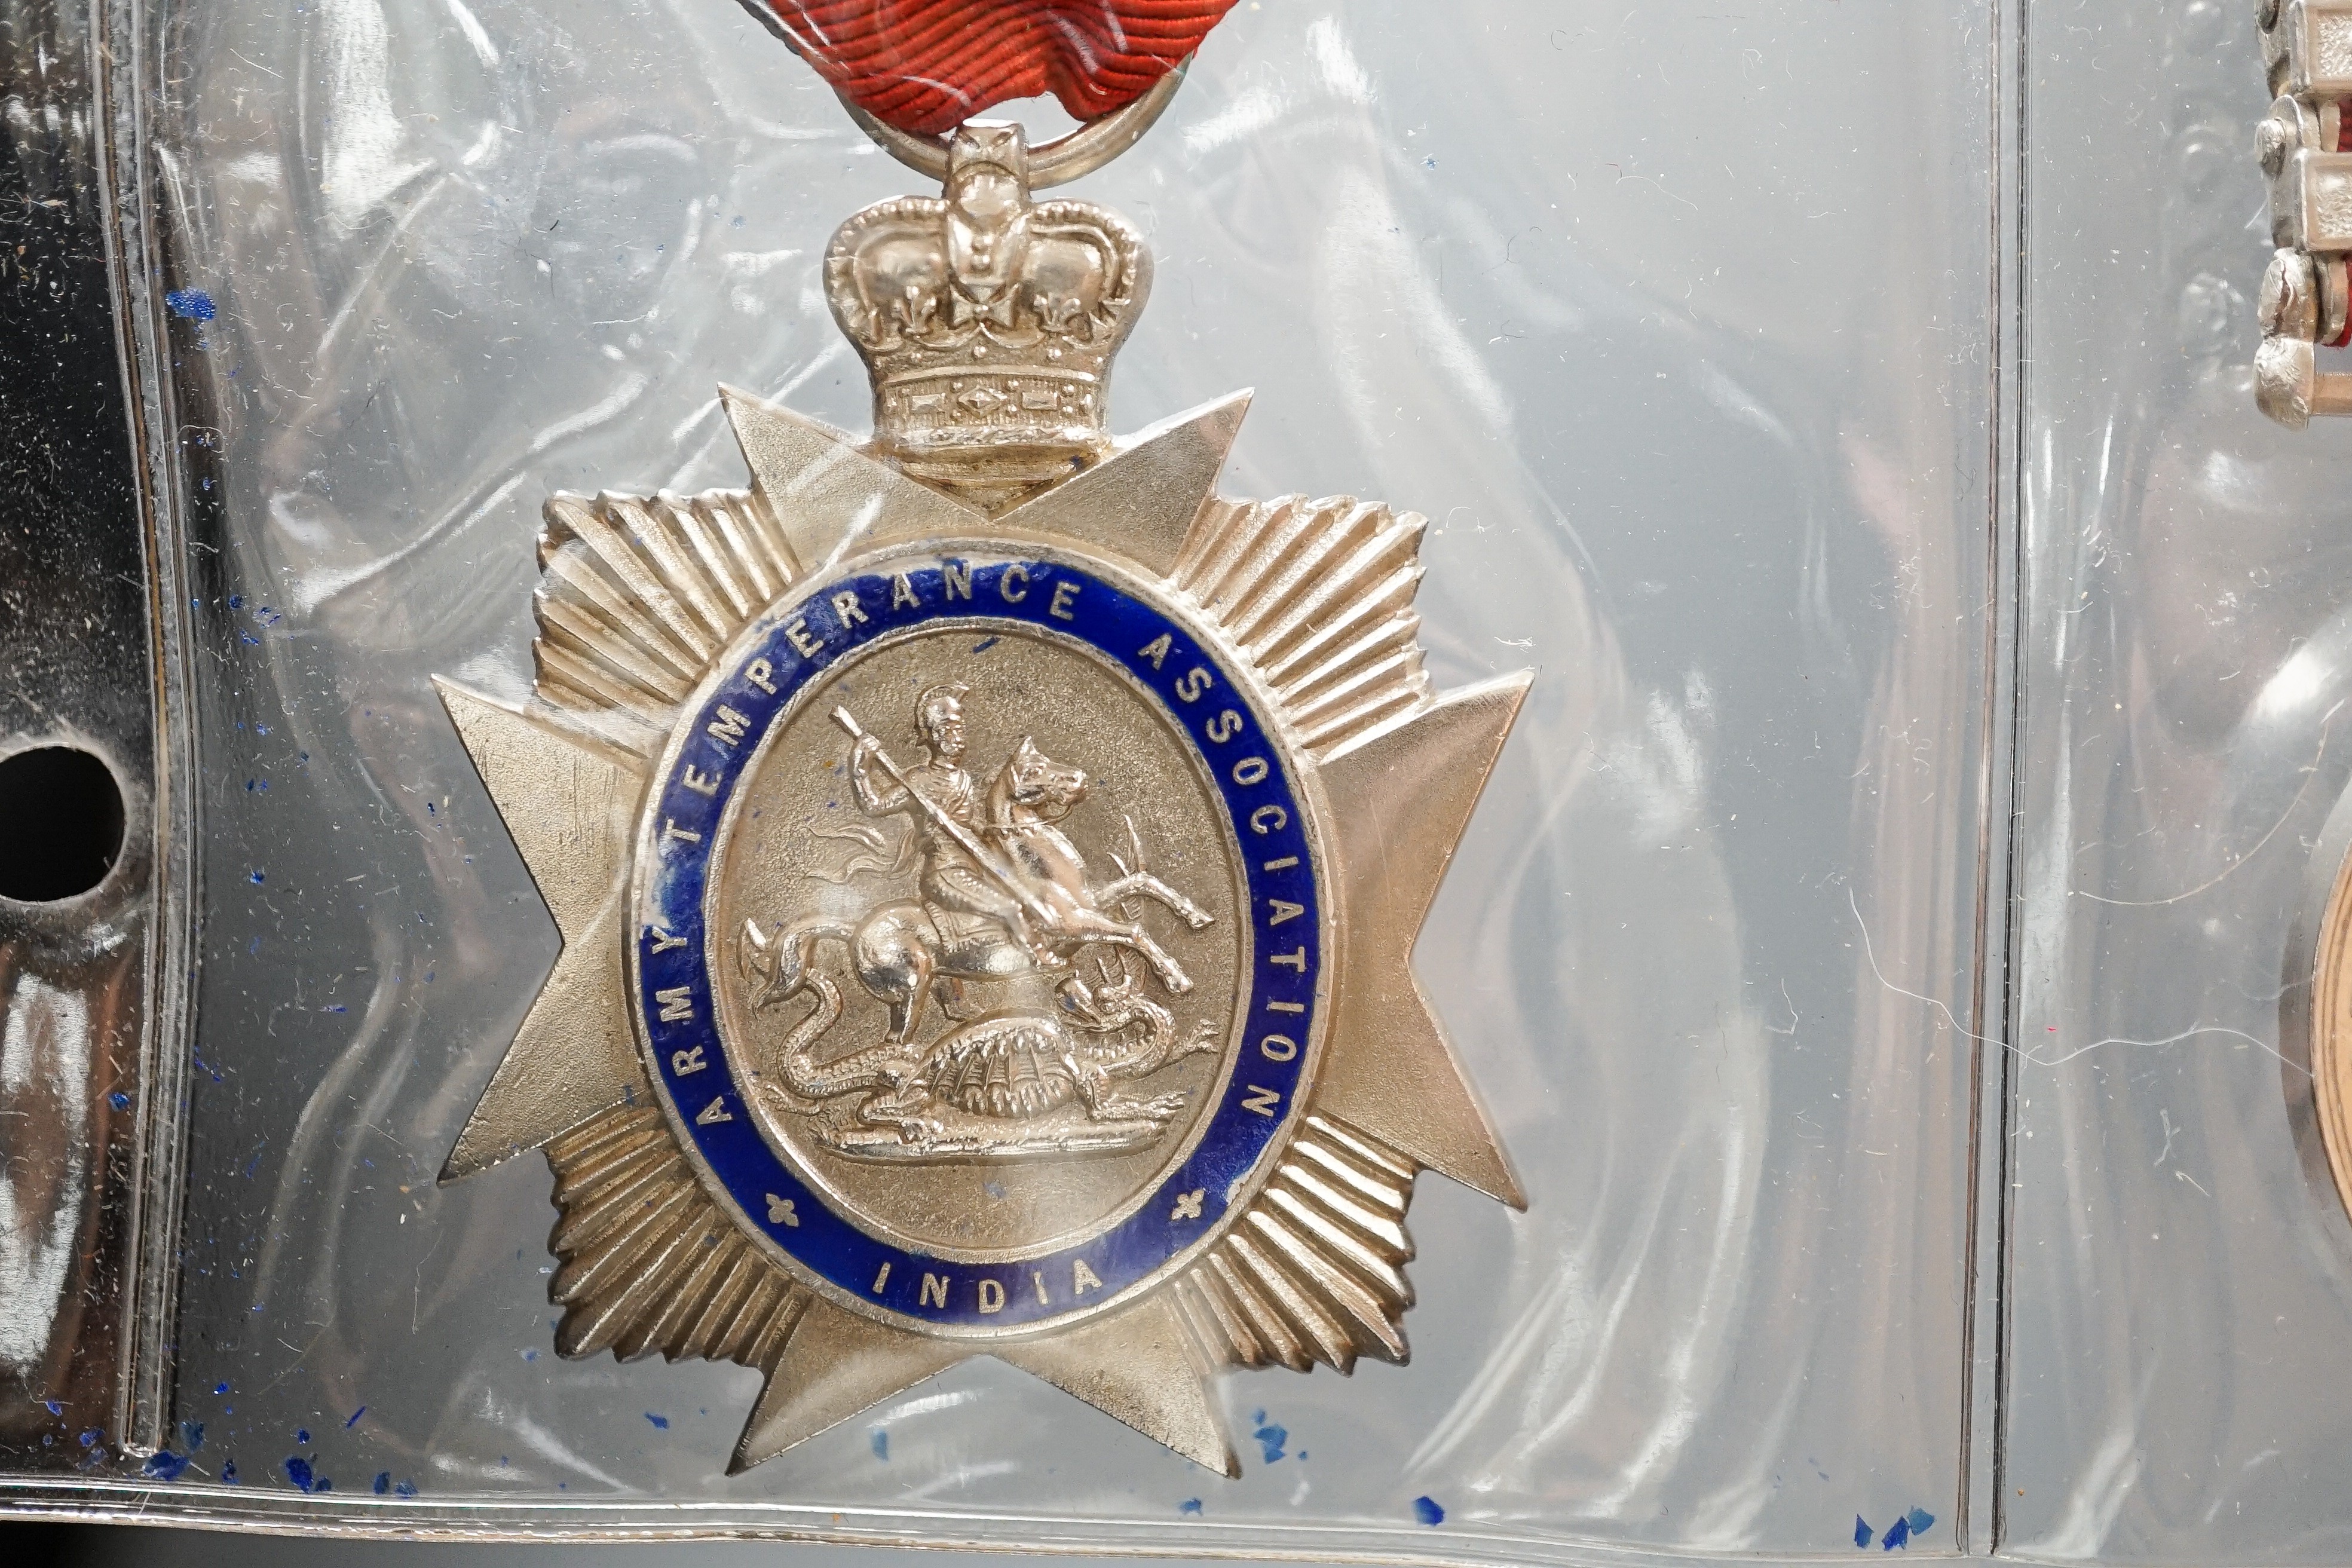 Six military associated medals to include - QSA with four clasps to 184 PTE. T. GRIFFITHS C.I.V., George V Territorial Force Efficiency Medal to 314 SJT. E.H. BARTON 25/ CYC.BN. LOND. REGT. (25th County of London Cyclist